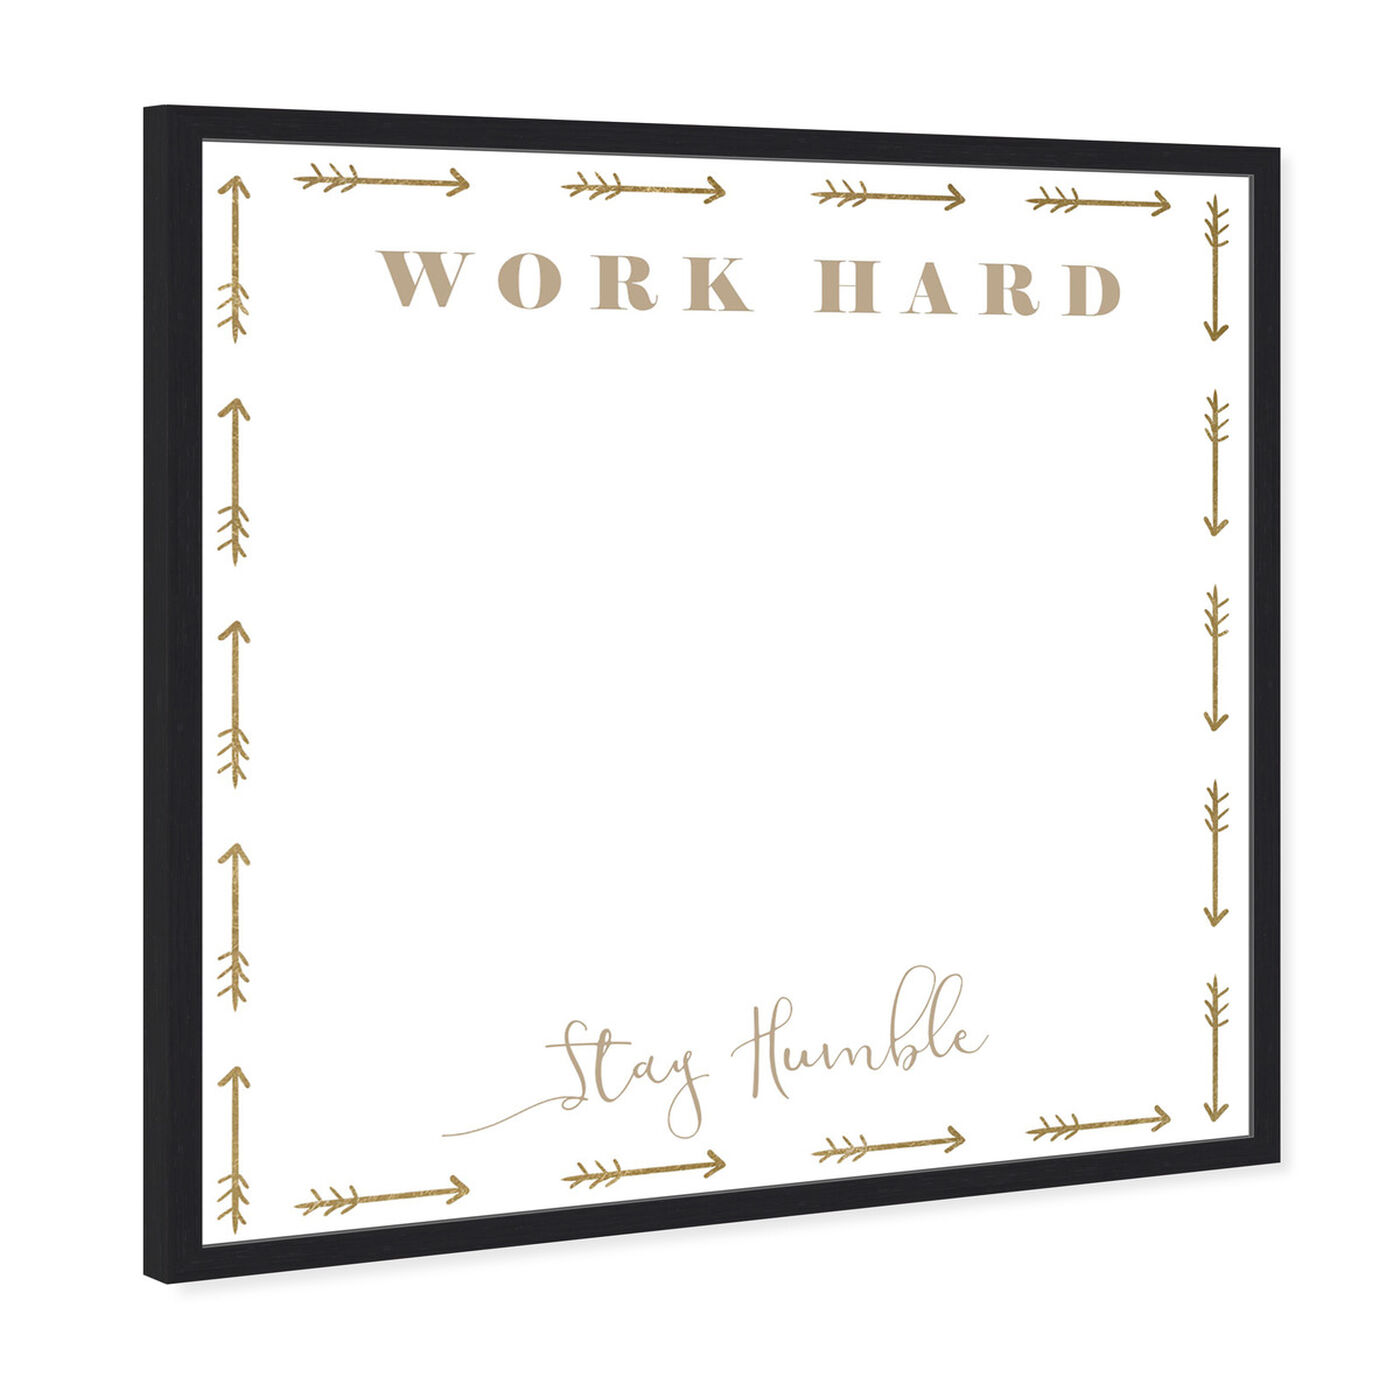 Angled view of Work Hard Stay Humble featuring education and office and whiteboards art.